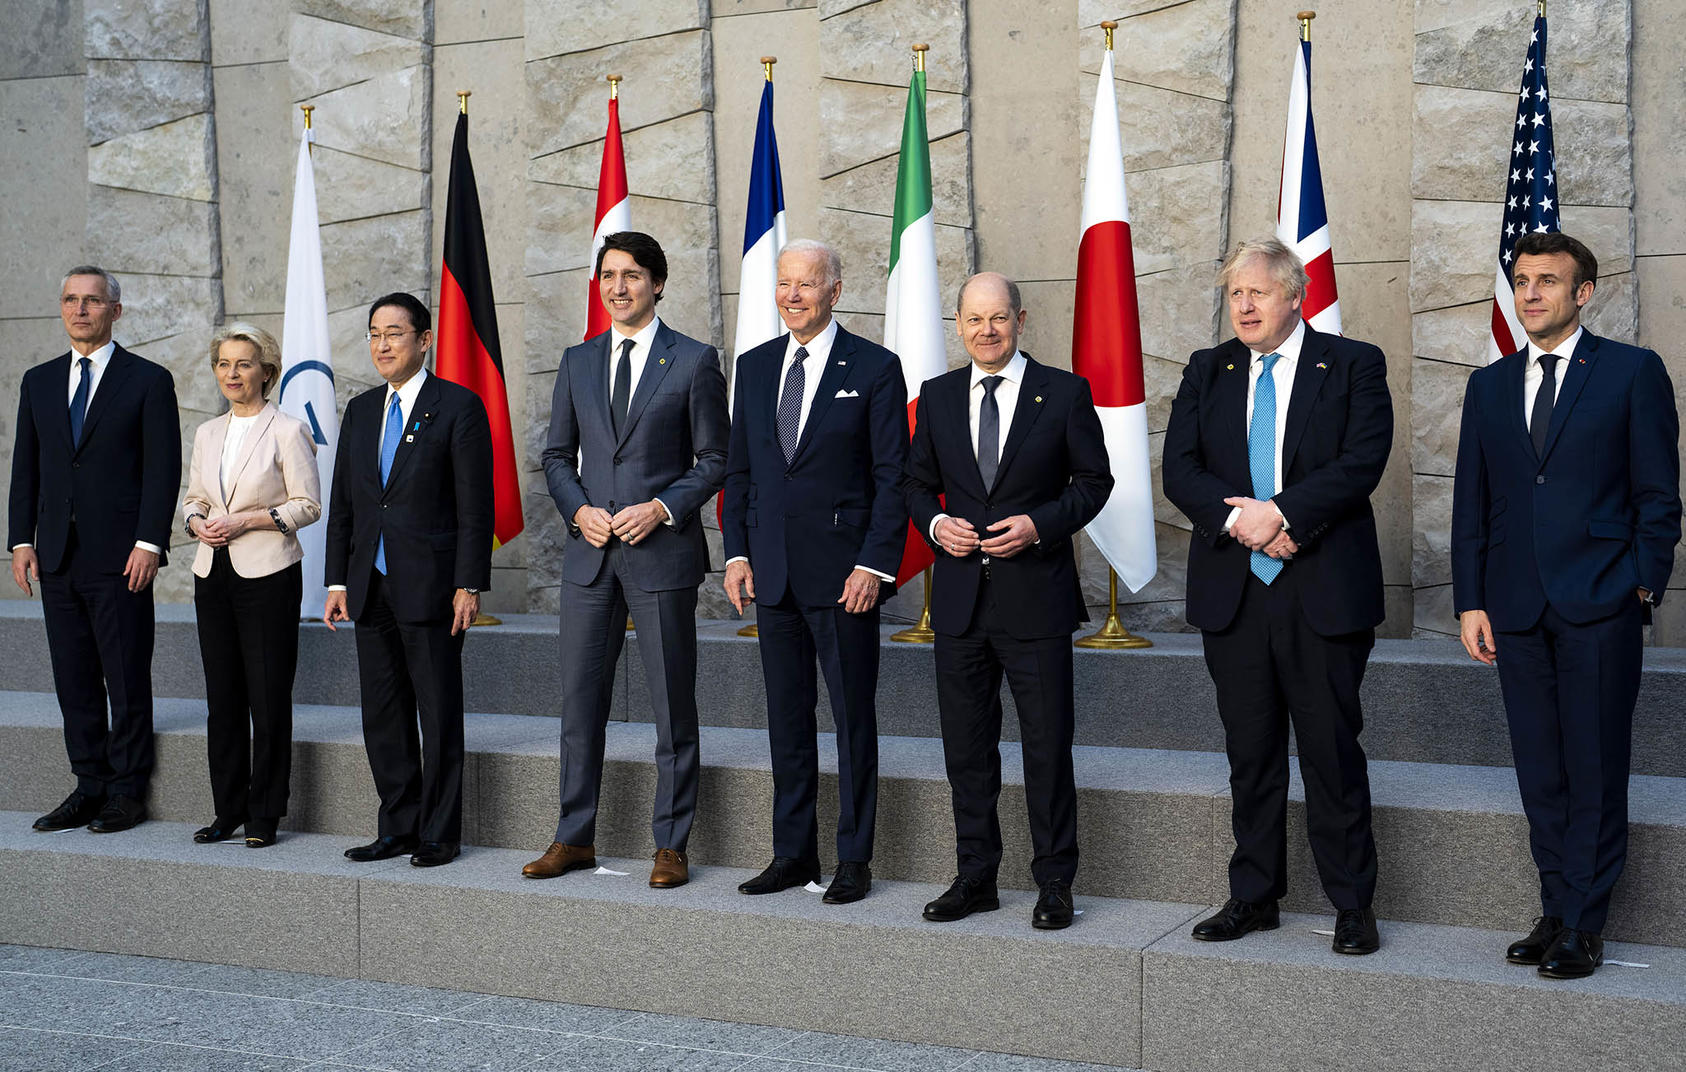 Lack of Security for Japanese PM Surprised Many